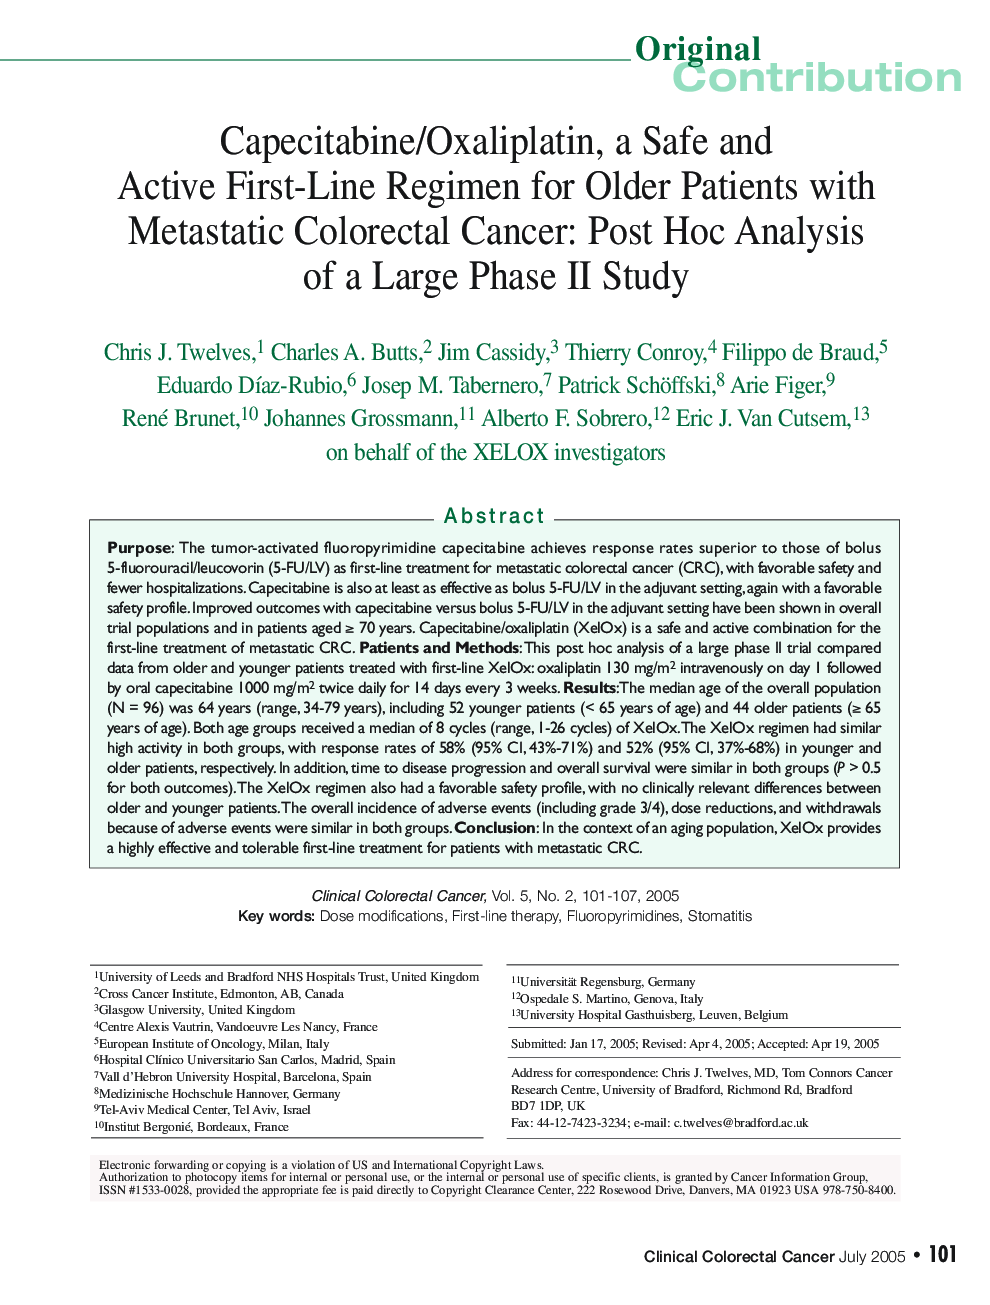 Capecitabine/Oxaliplatin, a Safe and Active First-Line Regimen for Older Patients Metastatic Colorectal Cancer: Post Hoc Analysis of a Large Phase II Study